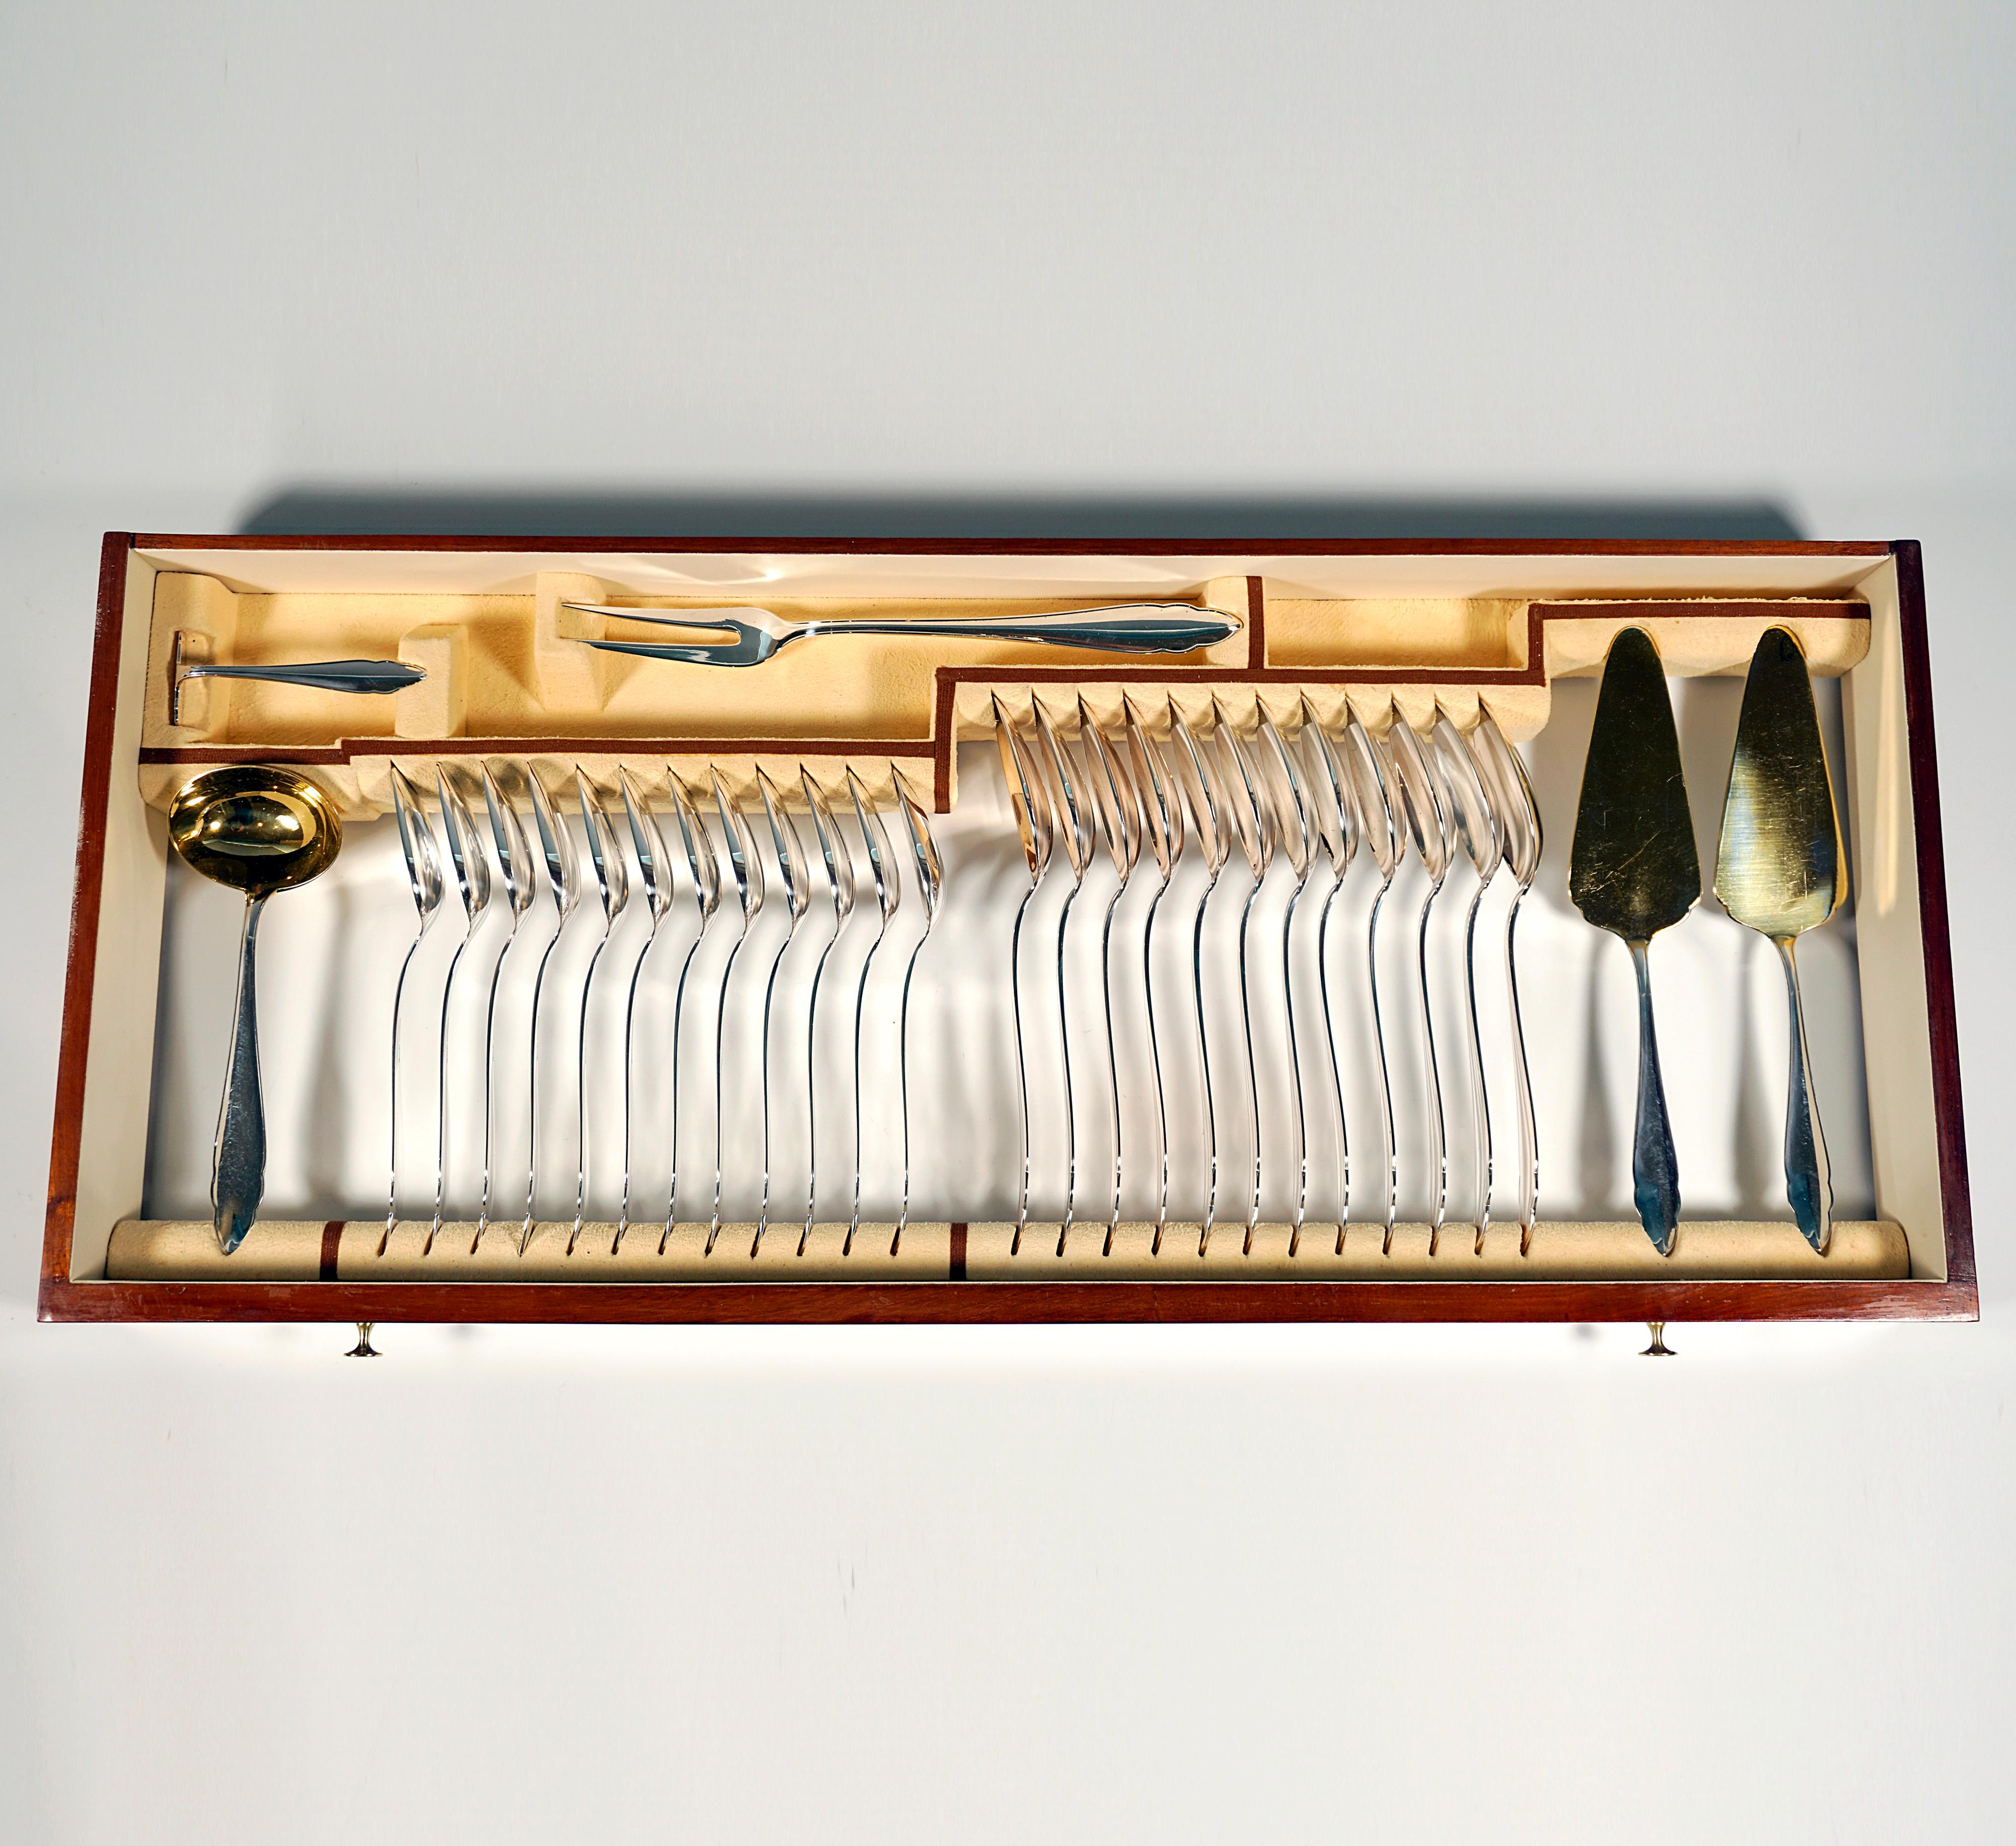 Art Déco Silver Cutlery Set For 12 People In Showcase by Bruckmann &Sons Germany In Good Condition For Sale In Vienna, AT